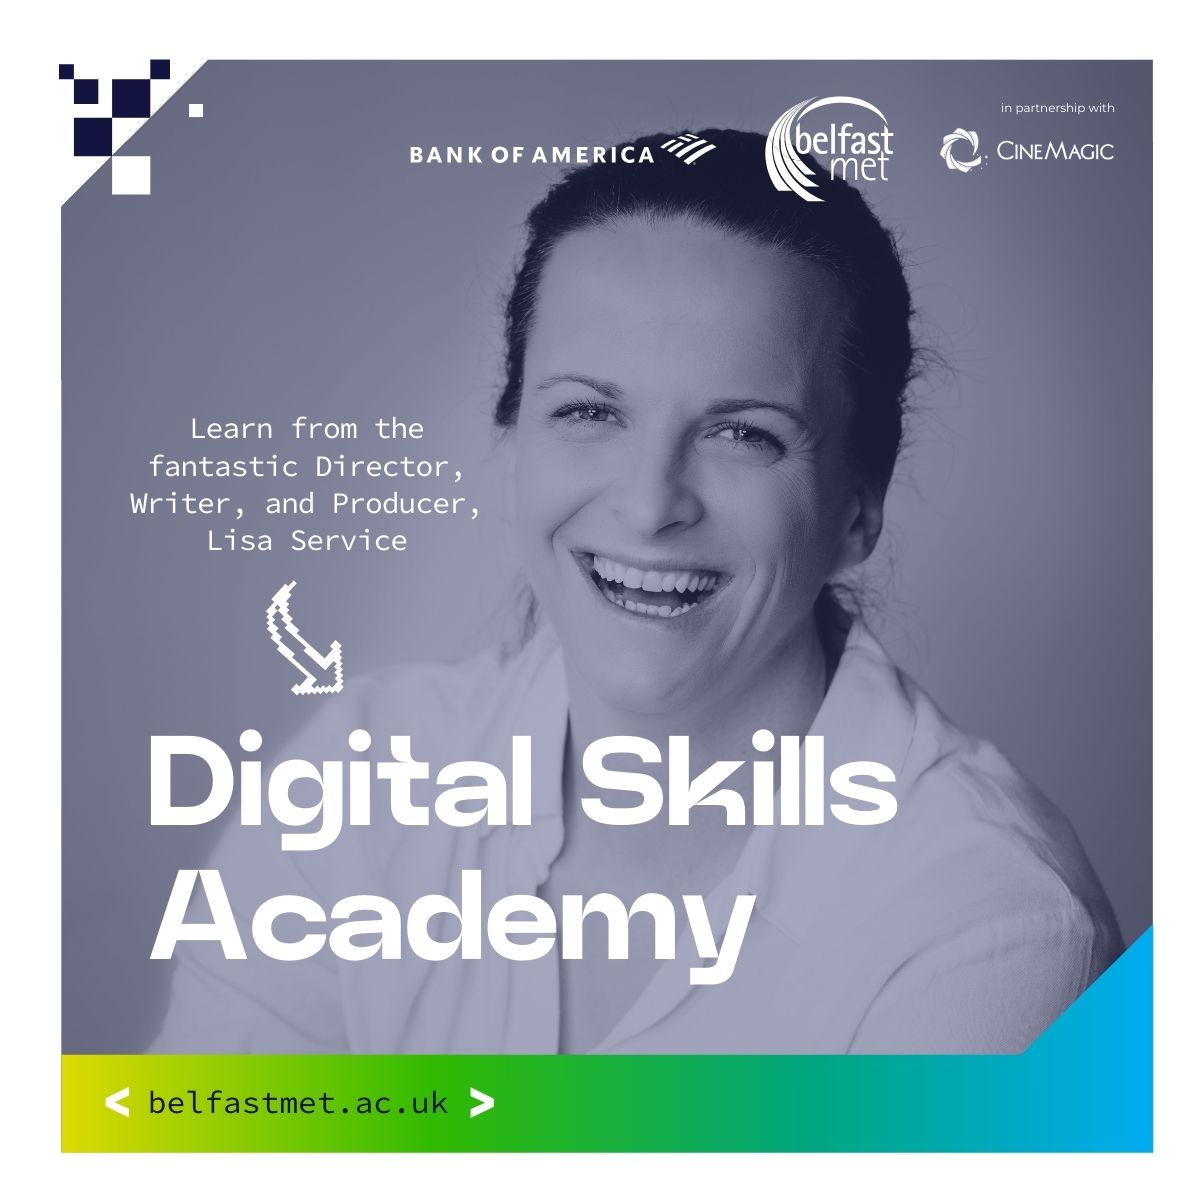 Learn from the best with @bfastmet’s #DigitalSkillsAcademy – hear from the accomplished Lisa Service and work towards your OCN NI Level 3 award!🔗tinyurl.com/2svwpsj4

Supported by @bankofamerica in partnership with Cinemagic.

#CreativeCareers #ScreenIndustry